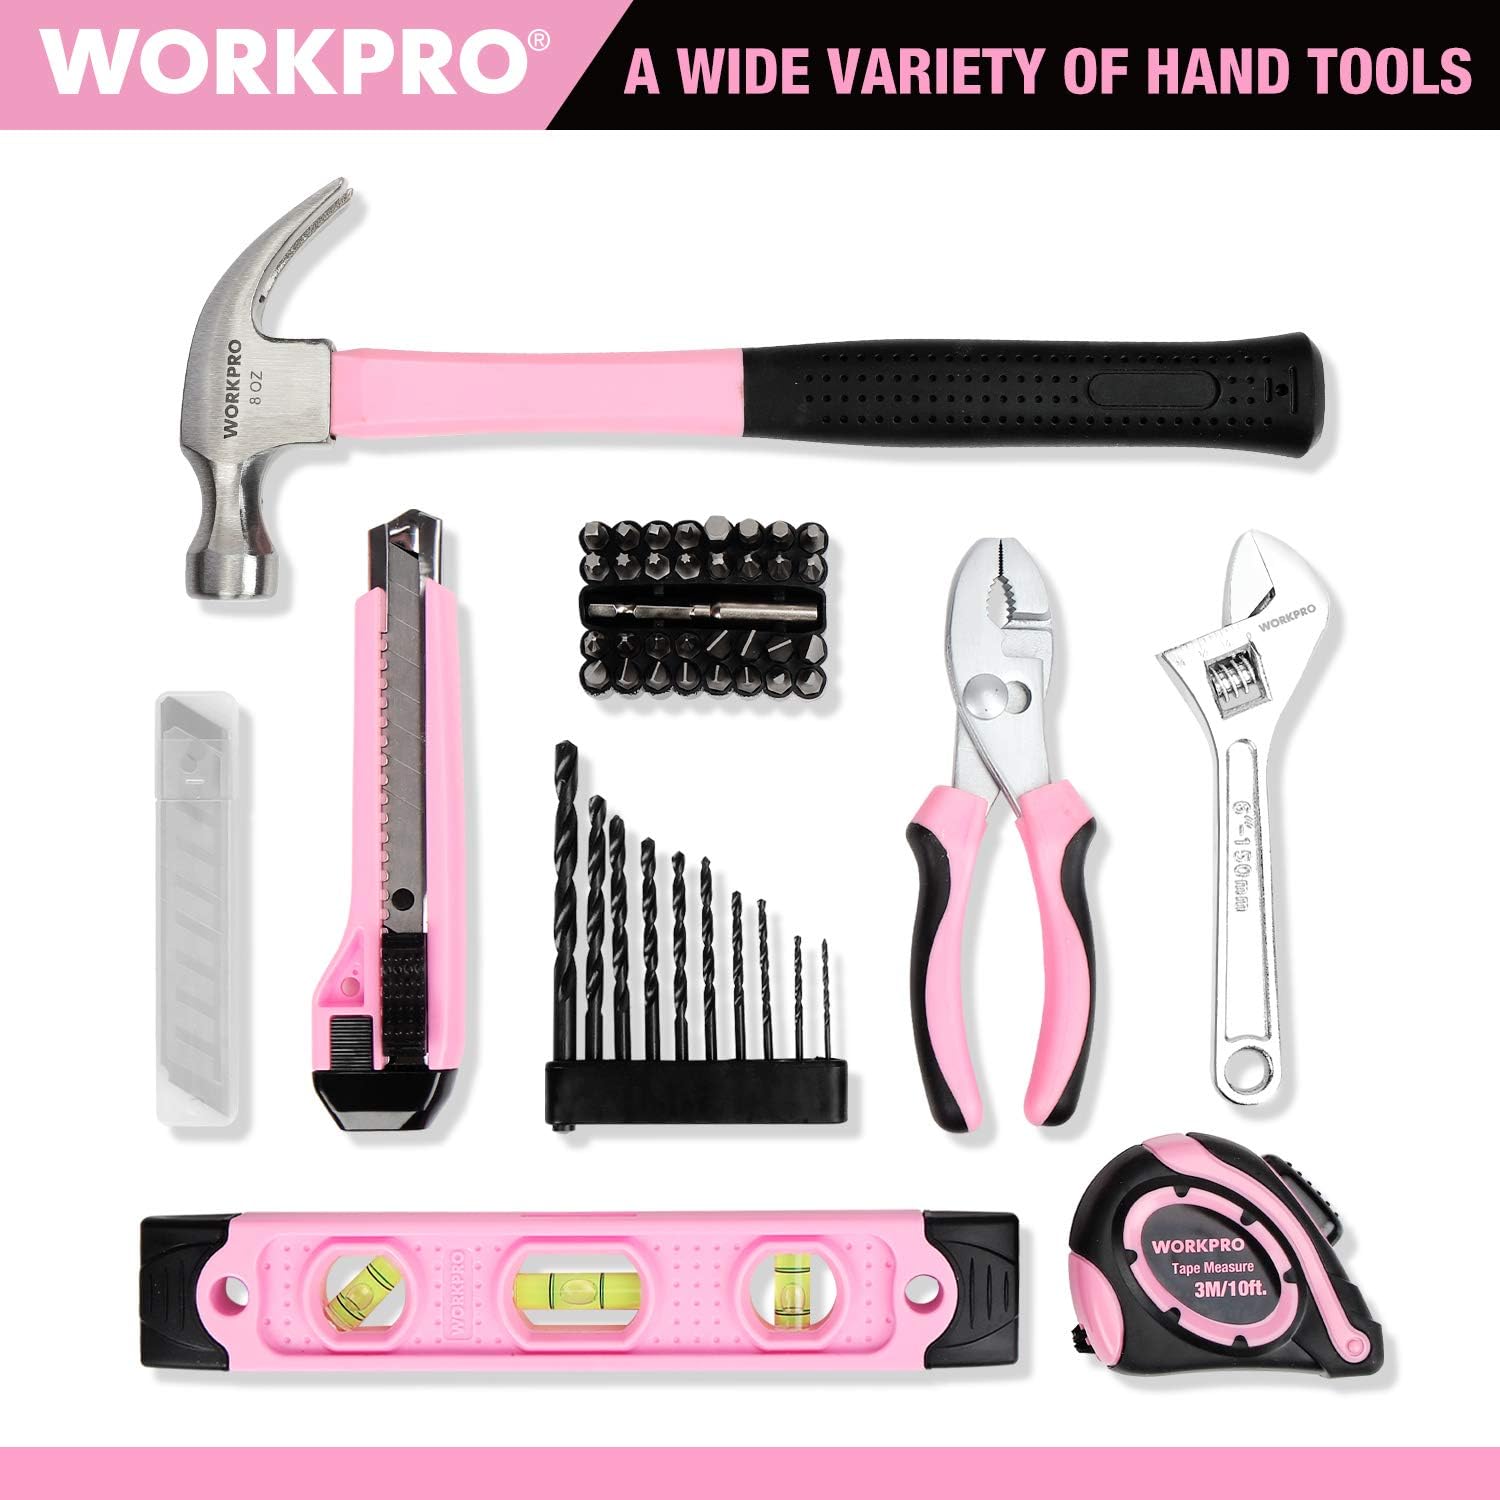 HANZGHOU GREATSTAR INDUSTRIAL  WORKPRO 12V Pink Cordless Drill and Home Tool Kit, 61 Pieces Hand Tool for DIY, Home Maintenance, 14-inch Storage Bag Included